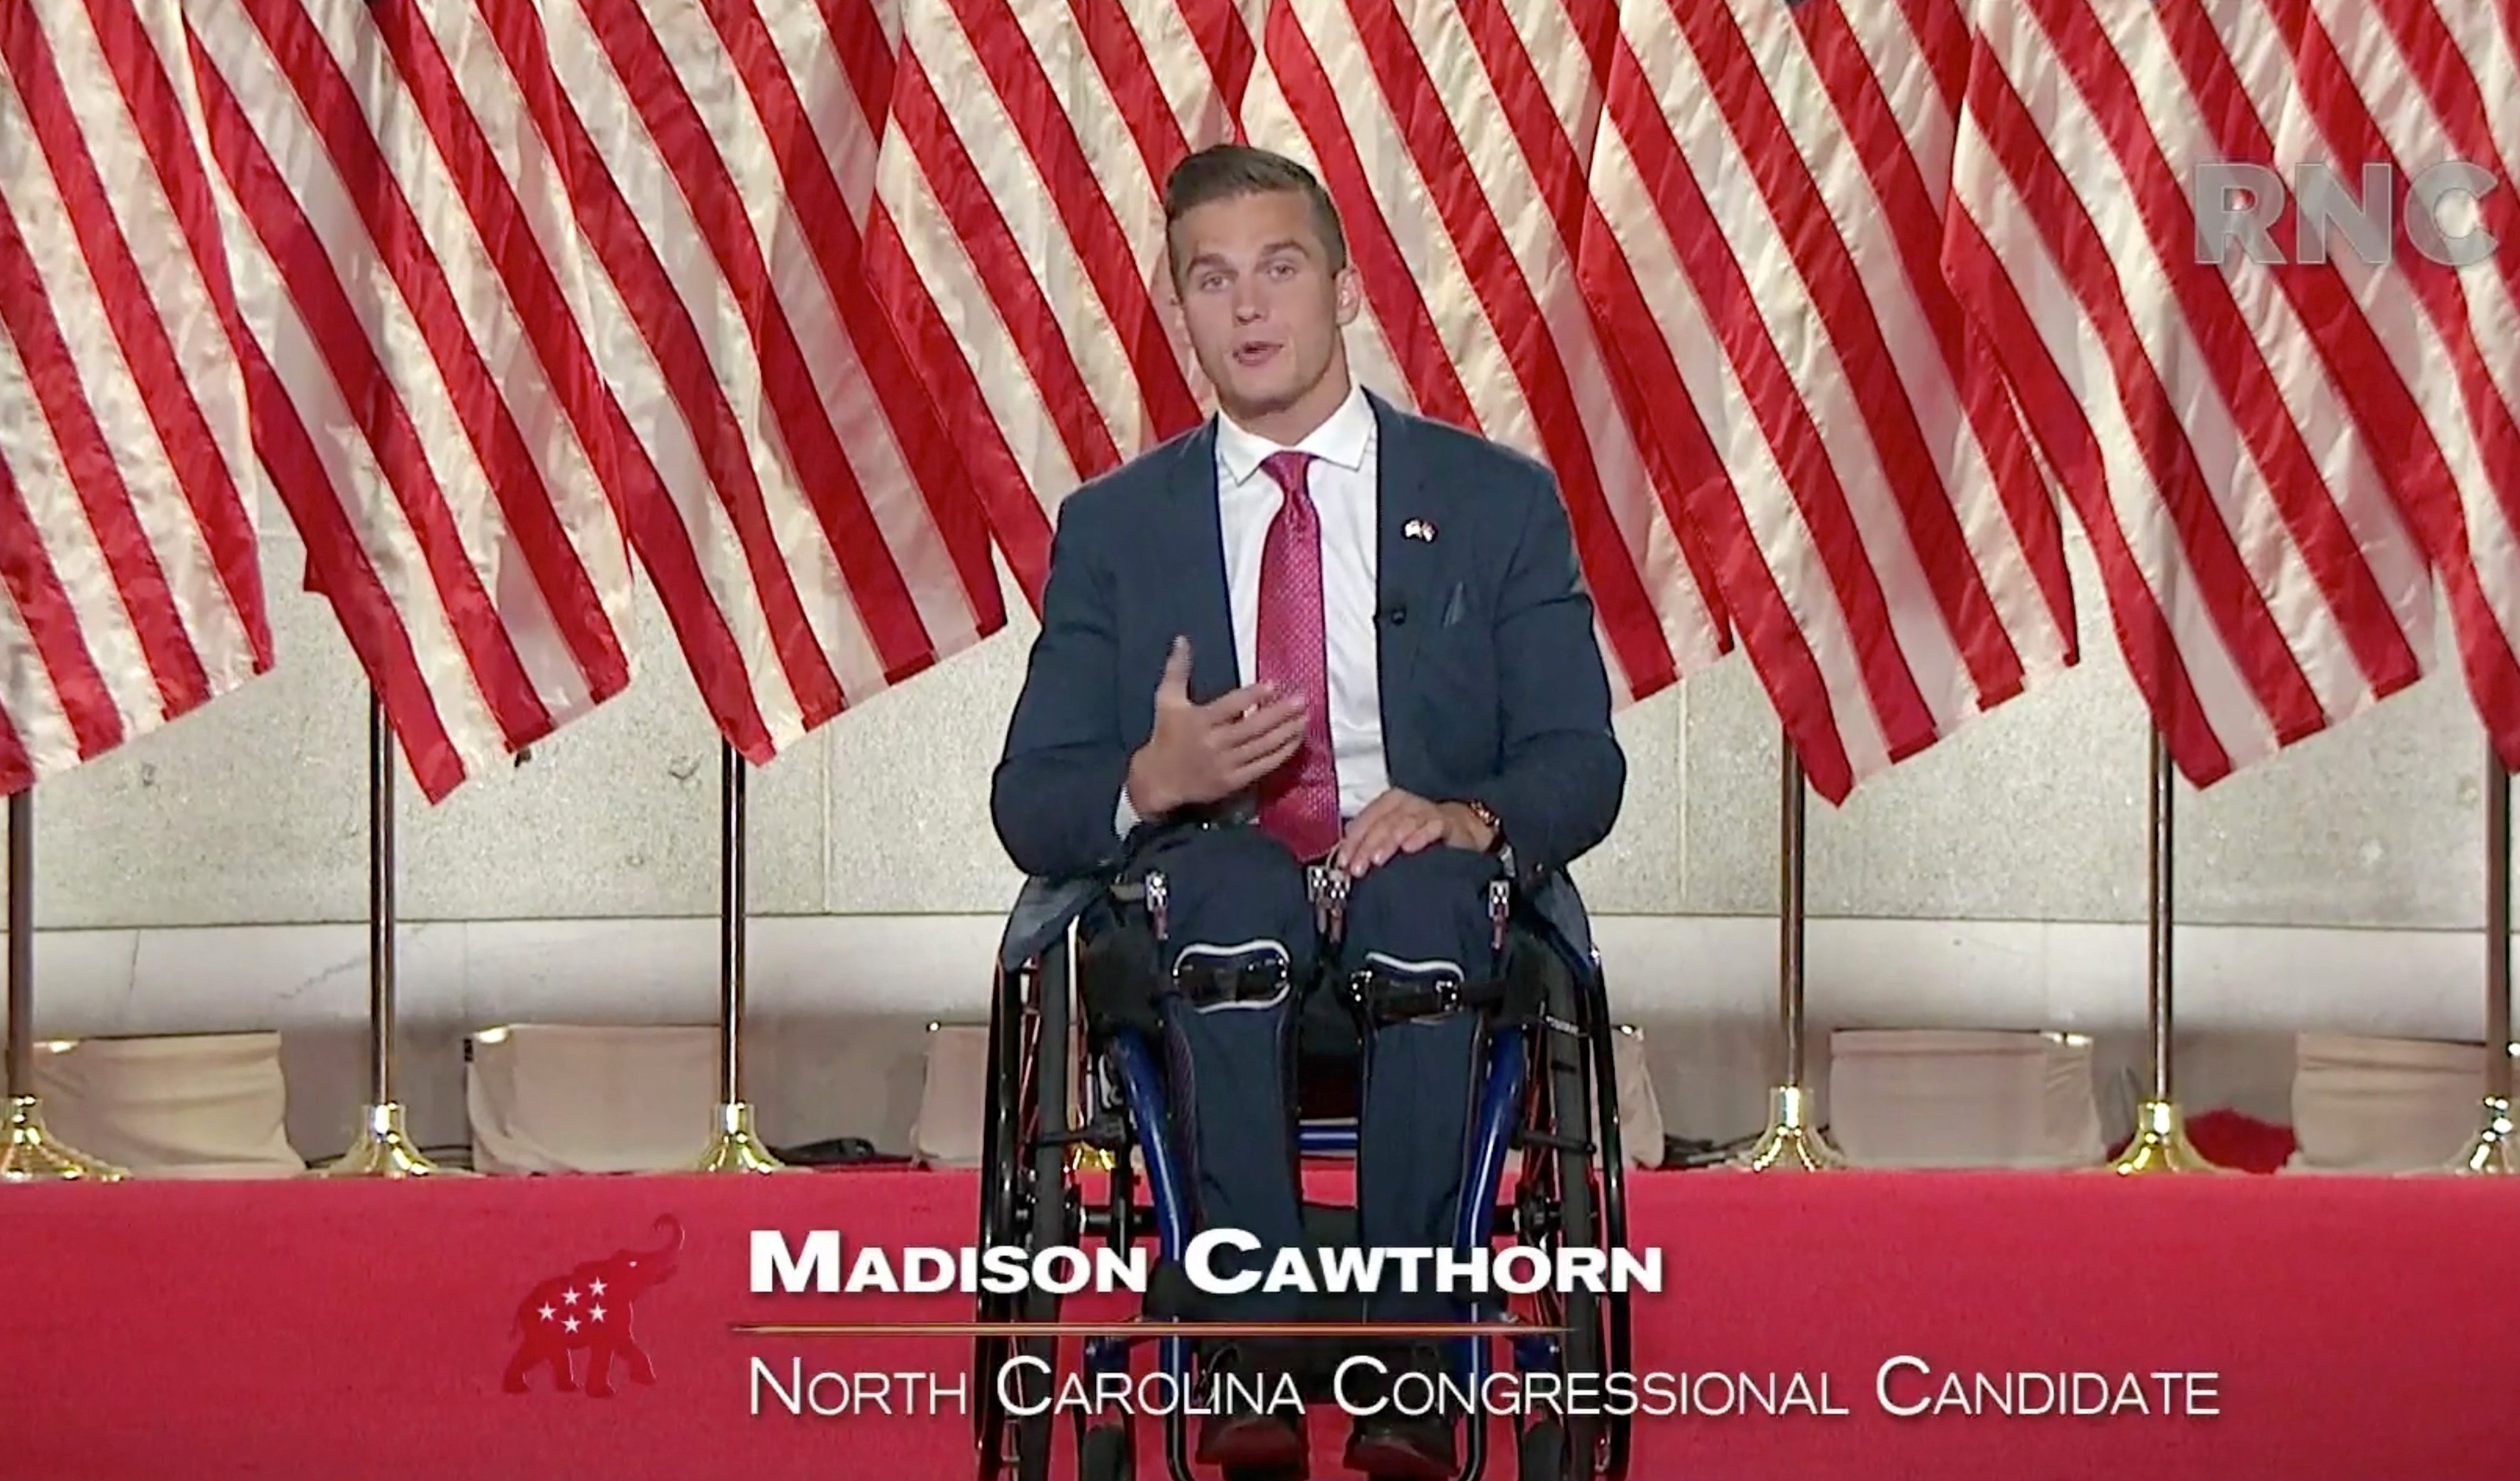 In this screenshot from a livestream of the 2020 Republican National Convention, North Carolina congressional nominee Madison Cawthorn gives a speech on Aug. 26, 2020. (RNC—Getty Images)